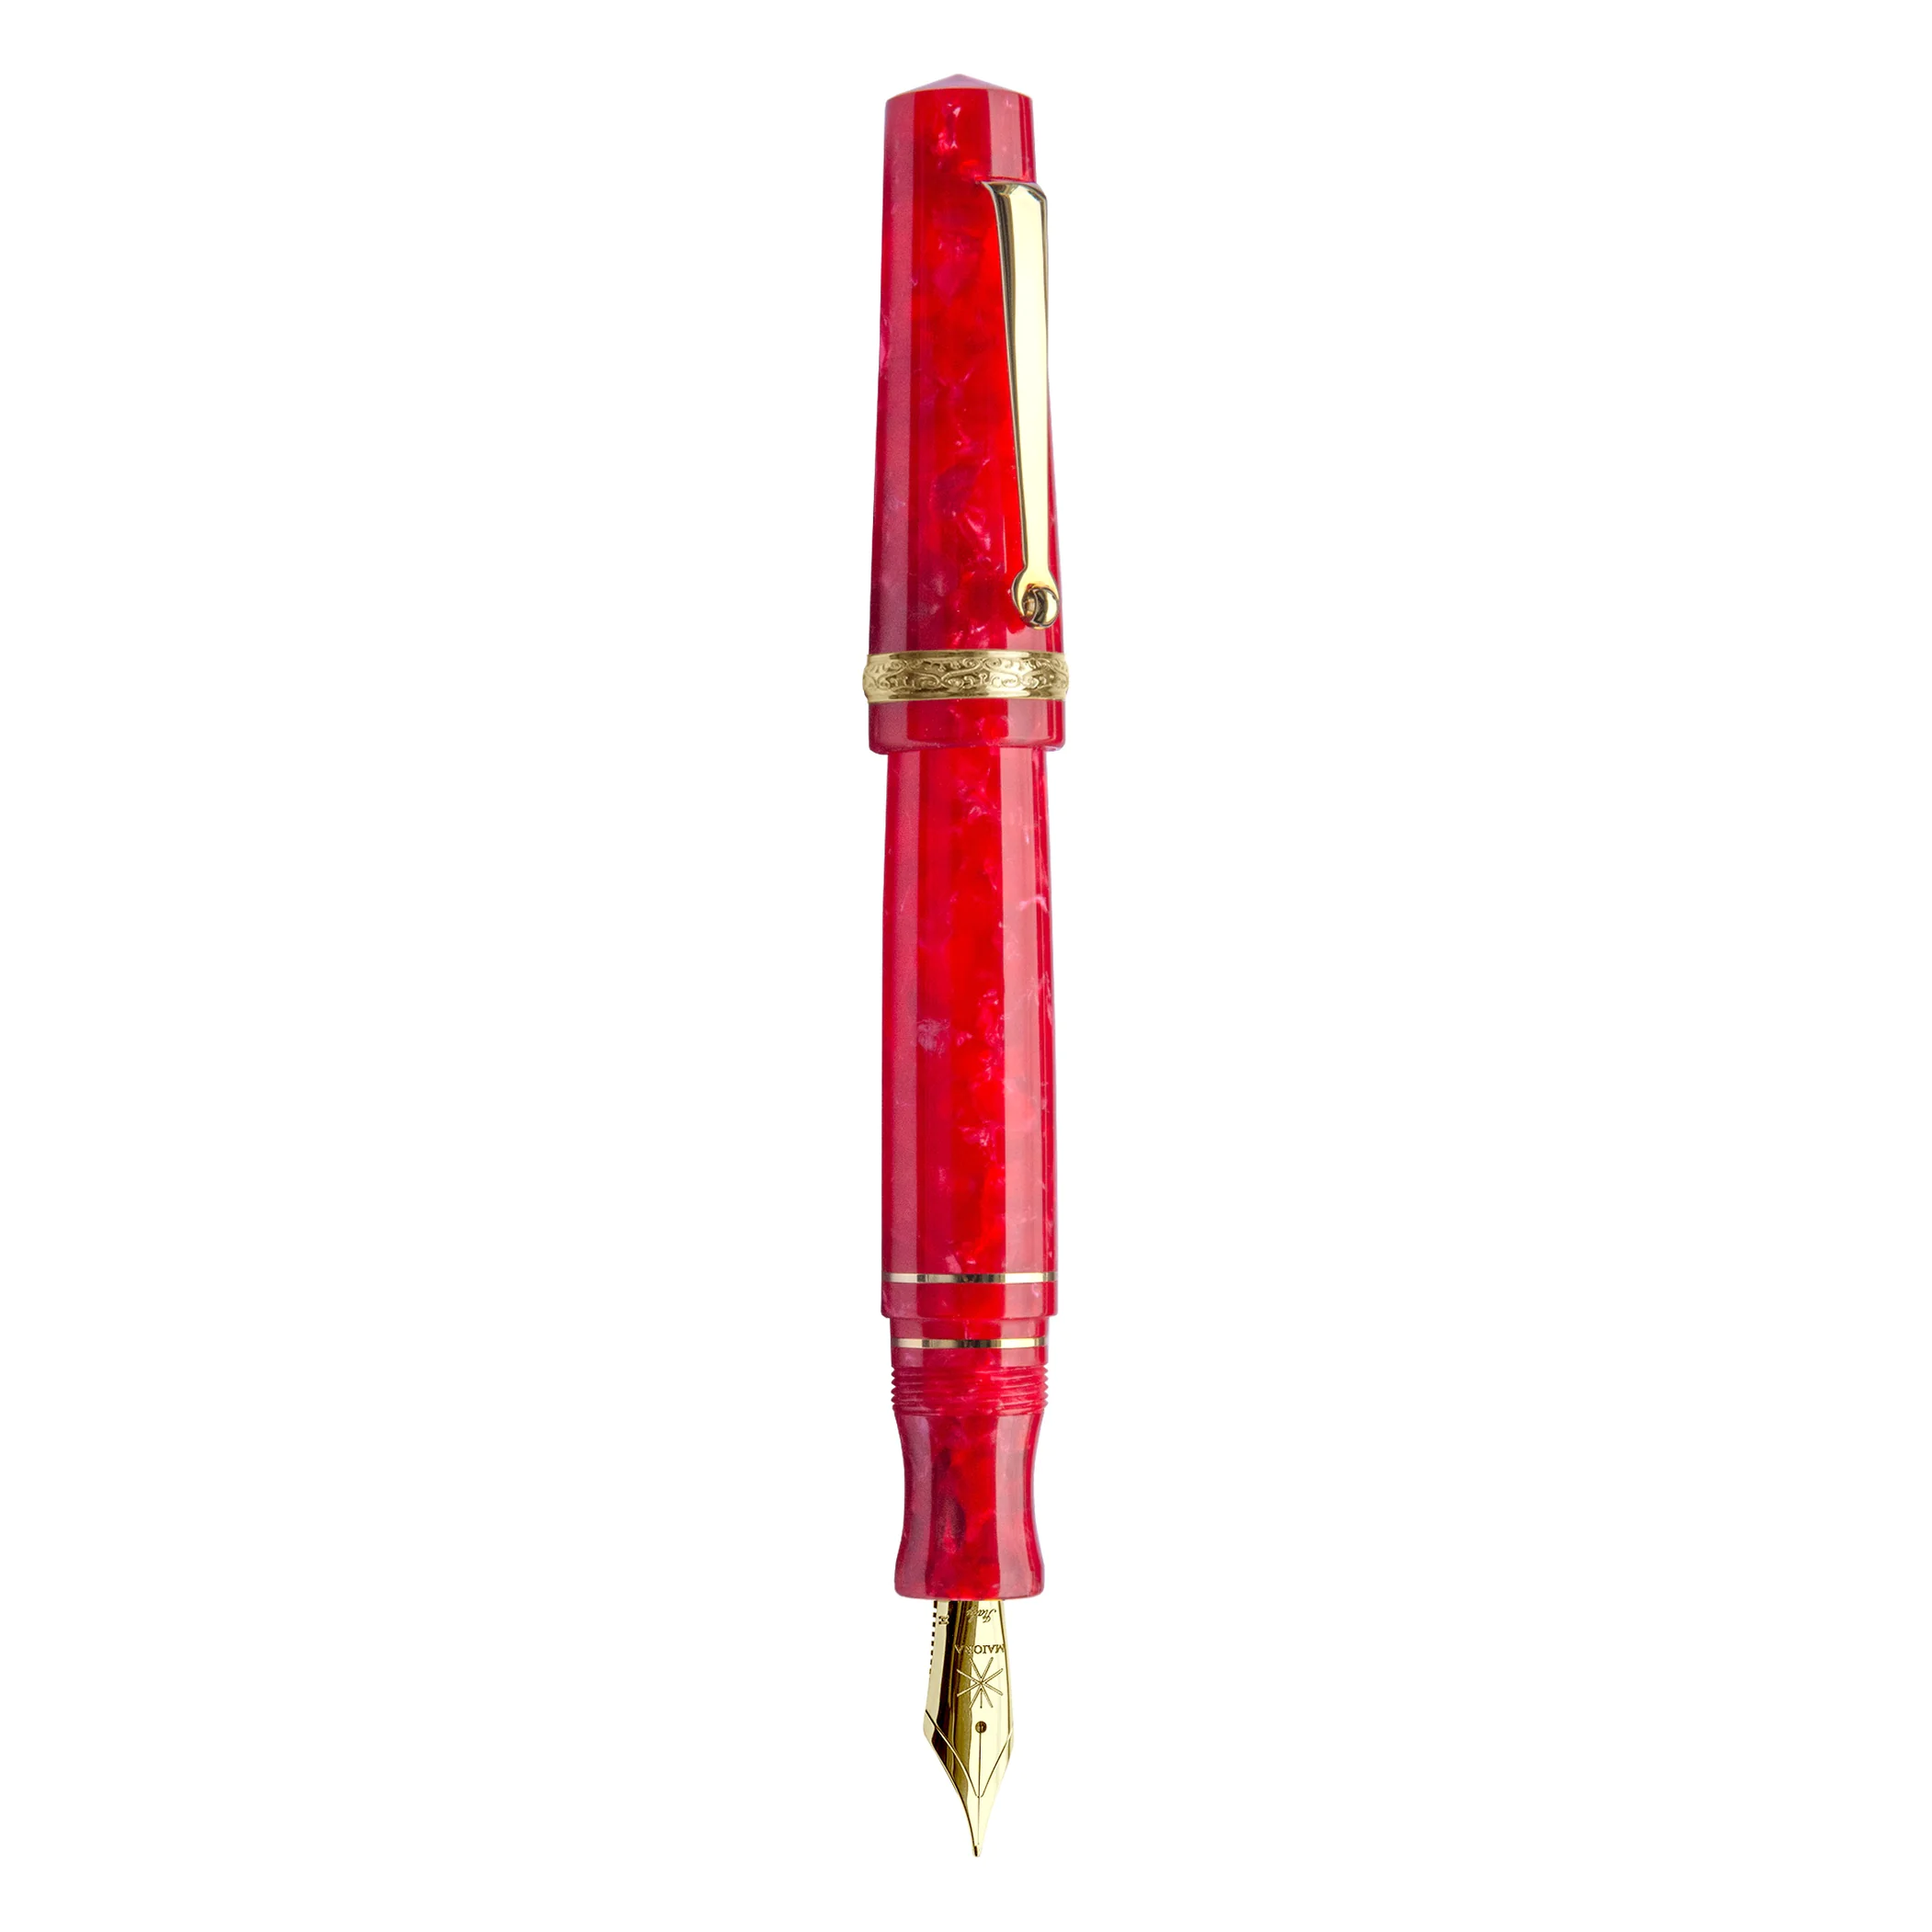 Maiora Adventus Amore (Red) Fountain Pen - Pencraft the boutique